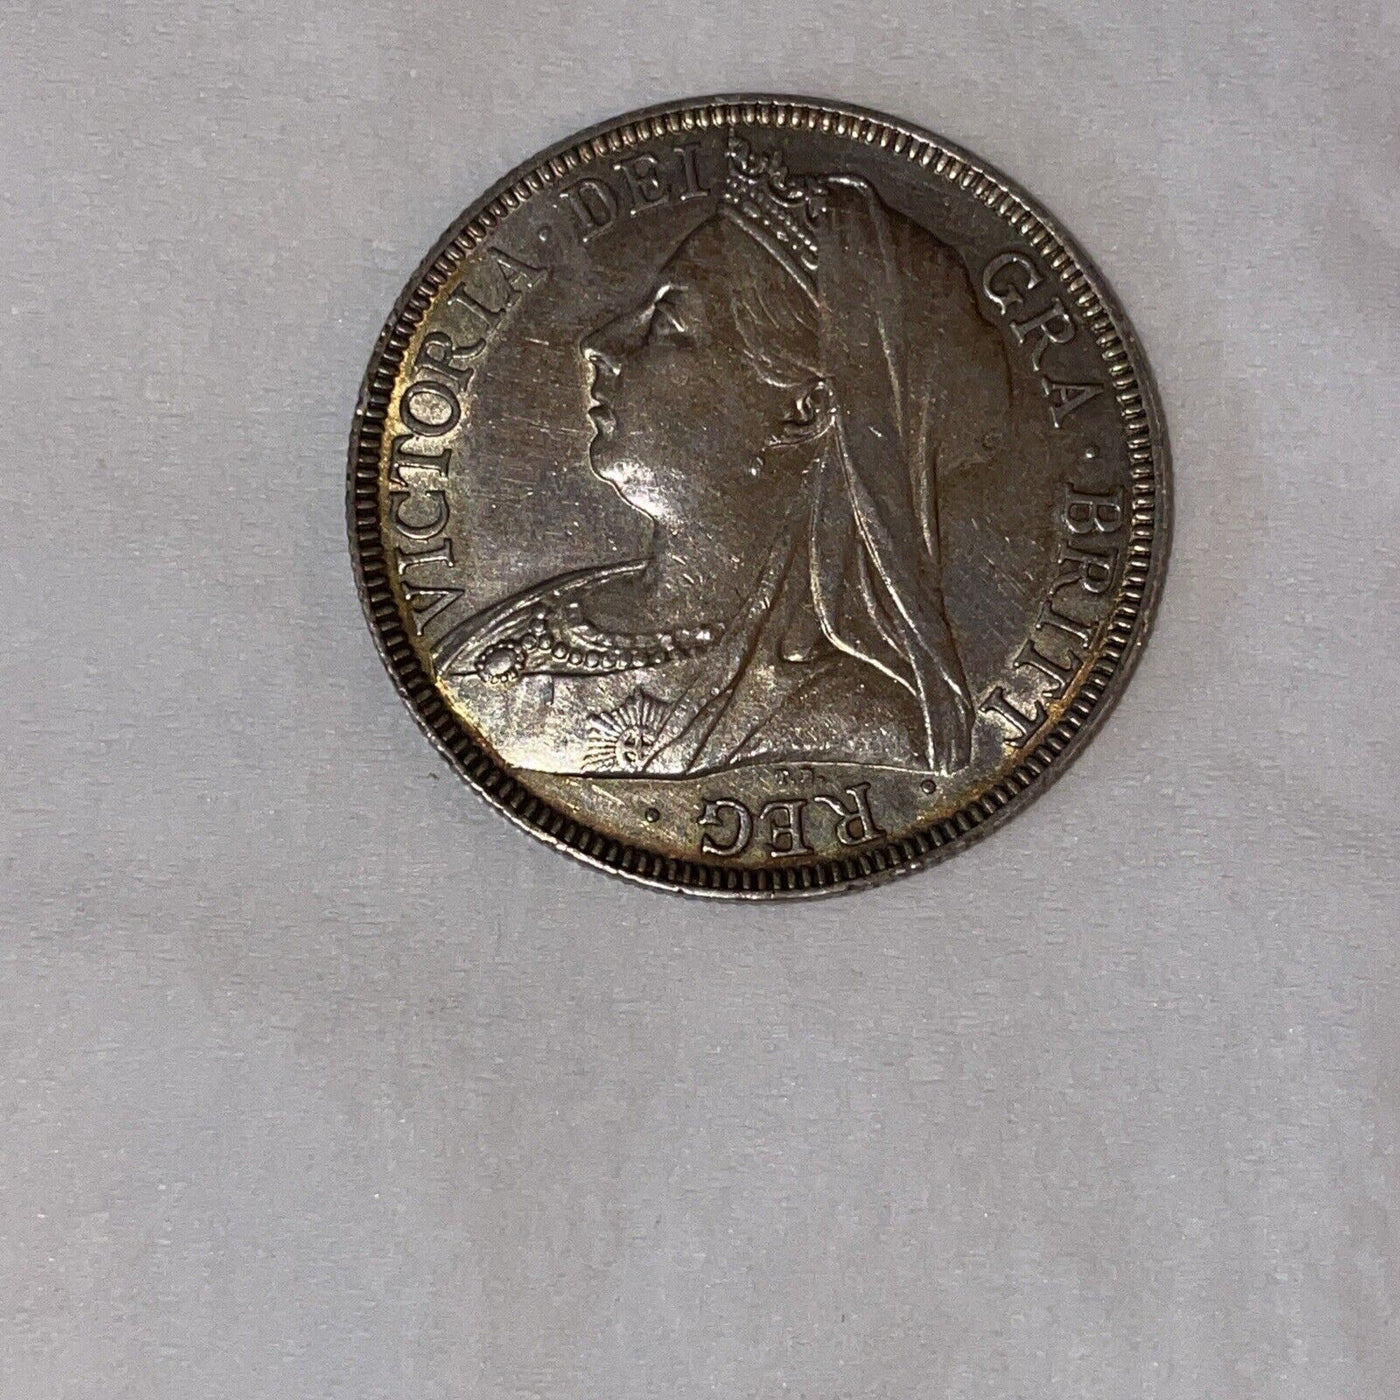 1896 Great Britain 1/2 Crown==ALmost Uncirculated .==FREE SHIPPING!